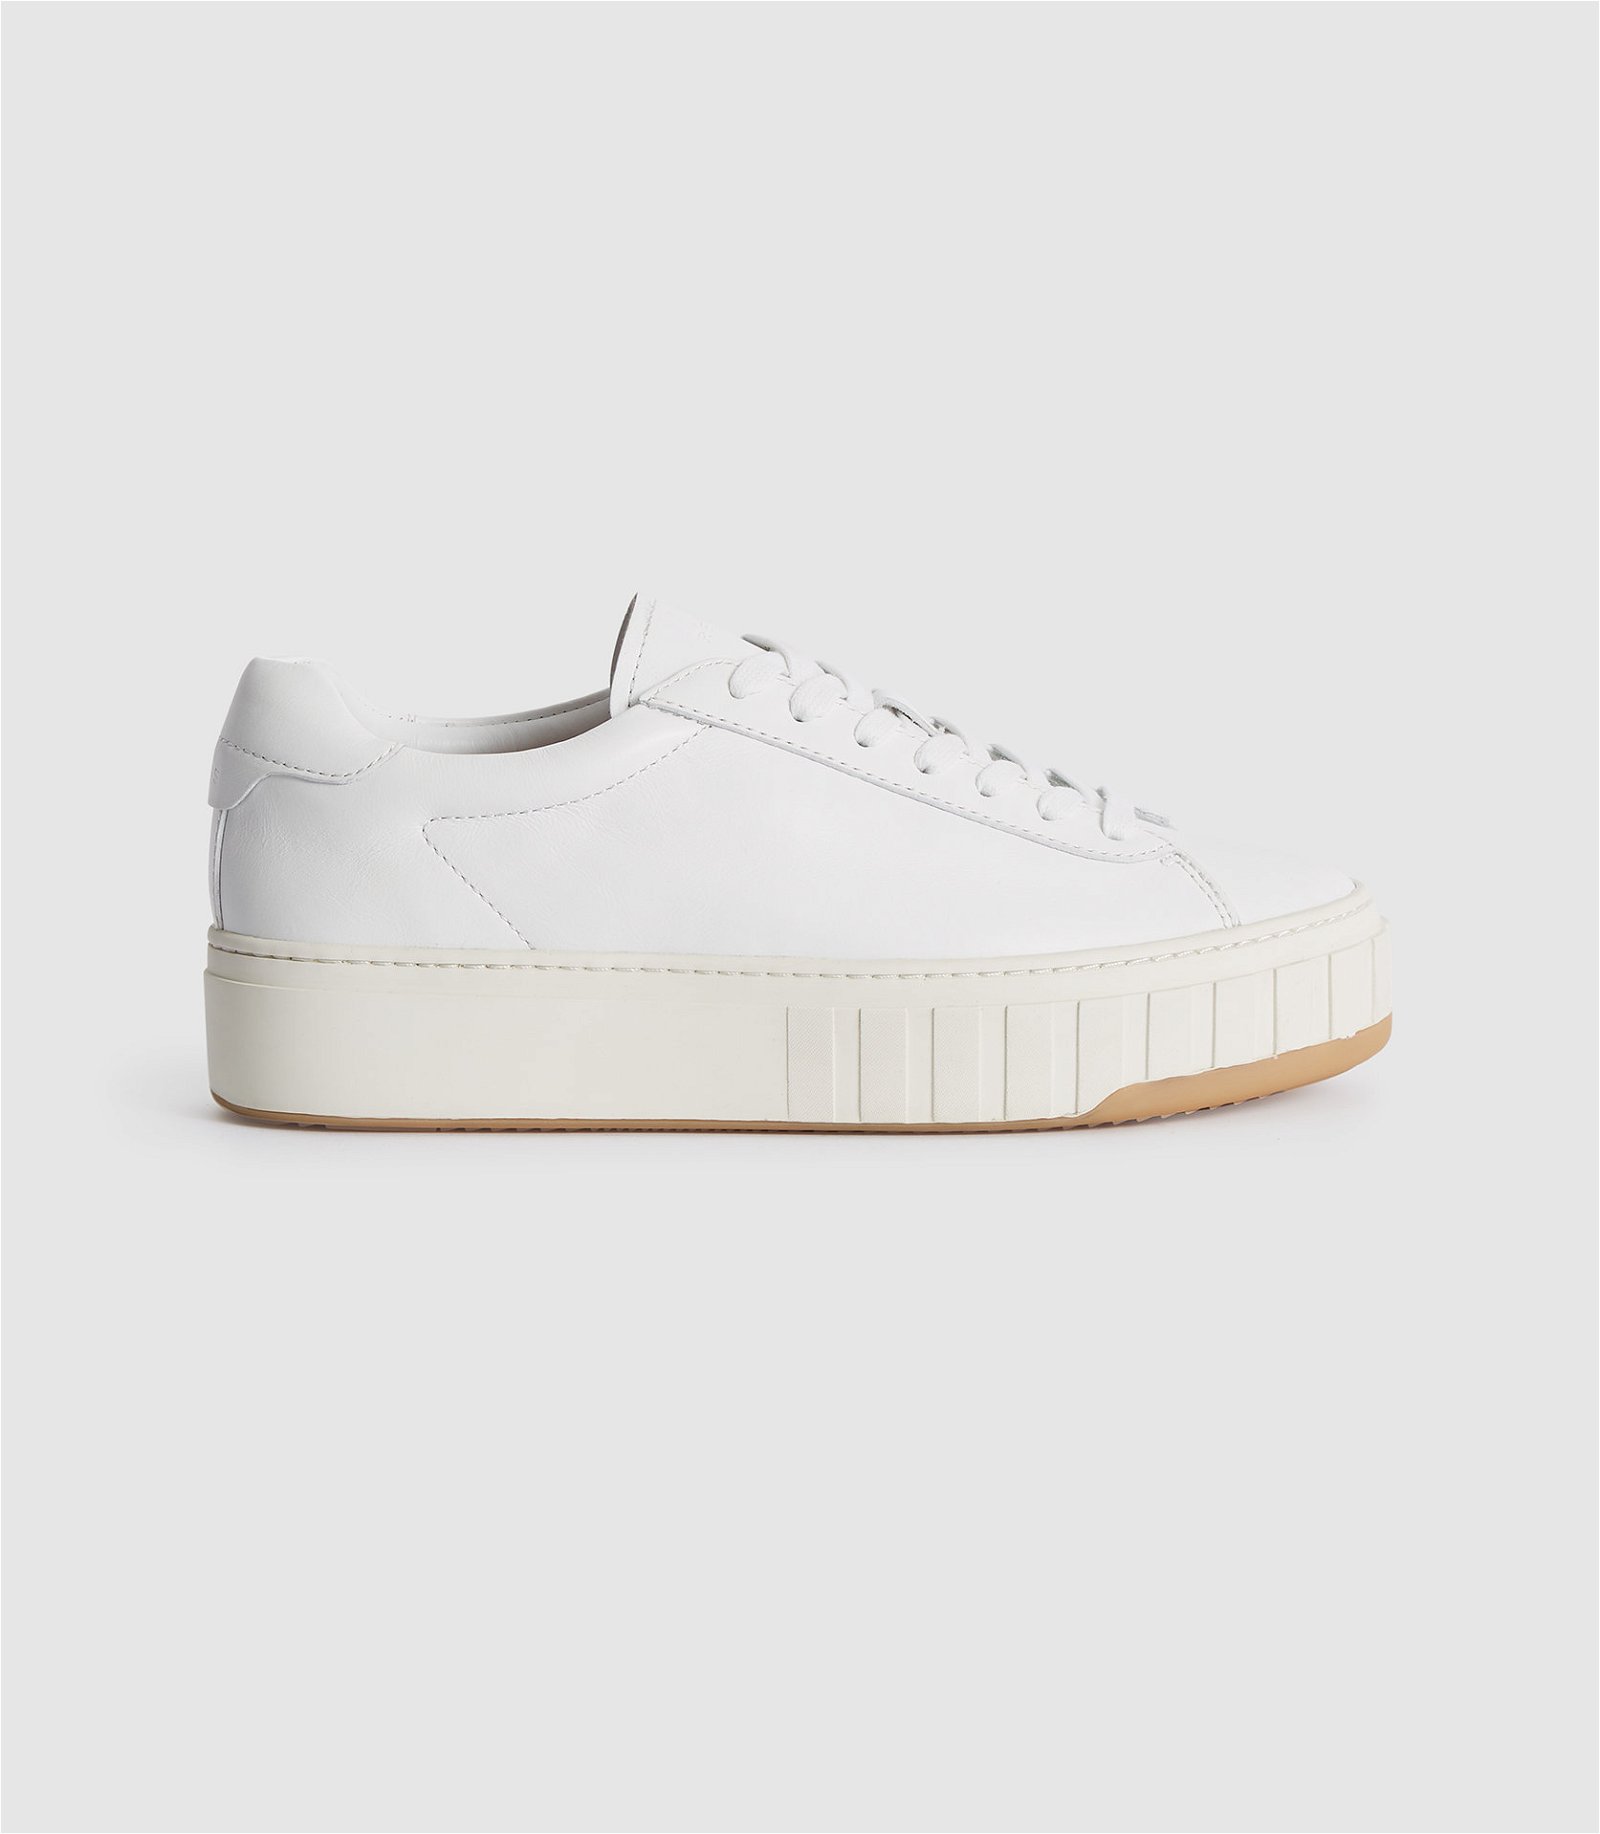 REISS Dover Street Leather Flatform Trainers in White | Endource